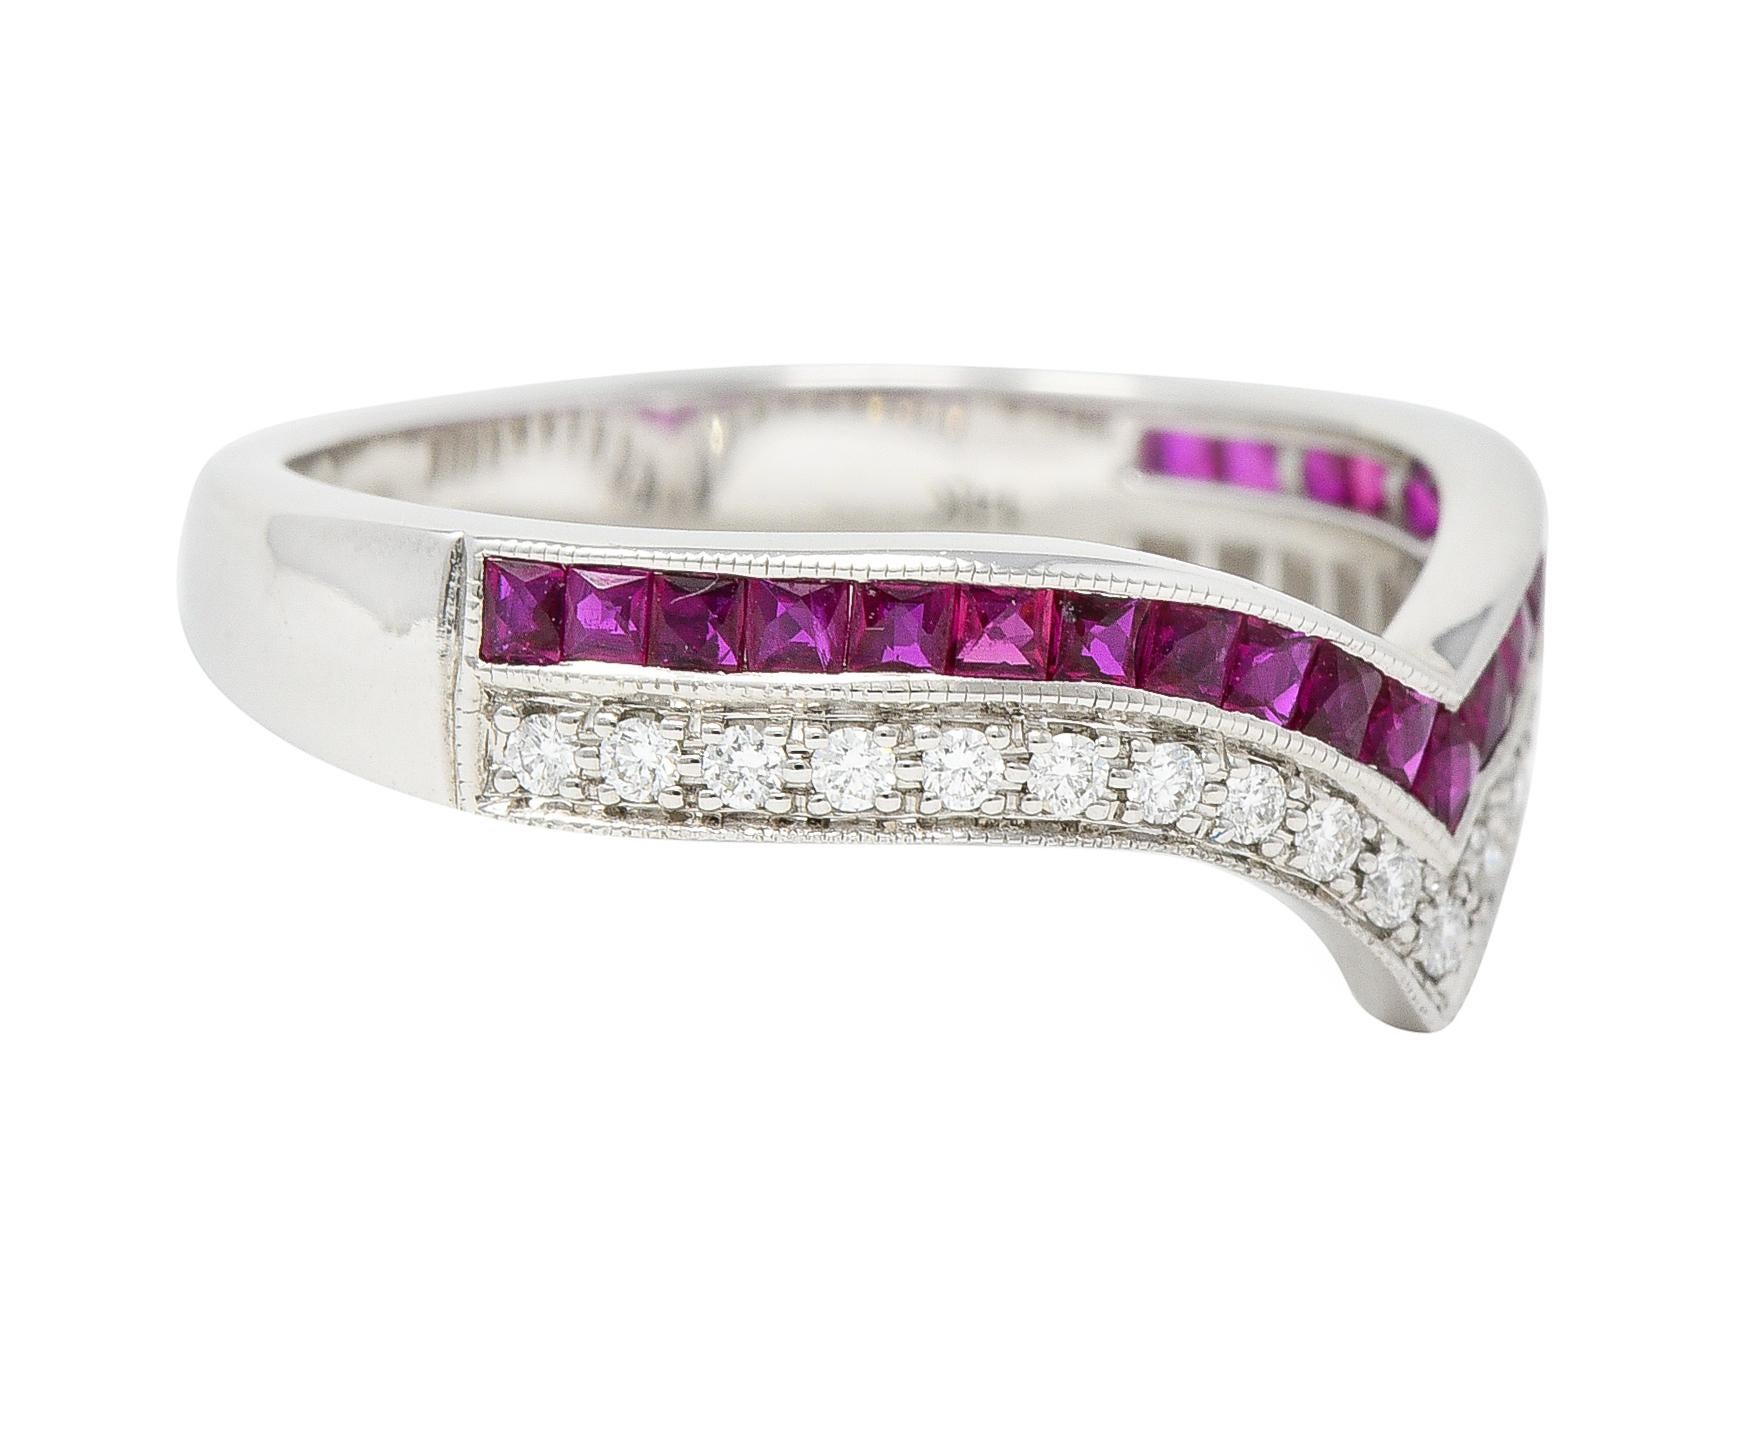 Designed as a pointed chevron motif contour style band featuring one row each of rubies and diamonds. Rubies are French cut and weigh approximately 0.54 carats total. Transparent purplish red in color and channel set to front. Diamonds are round